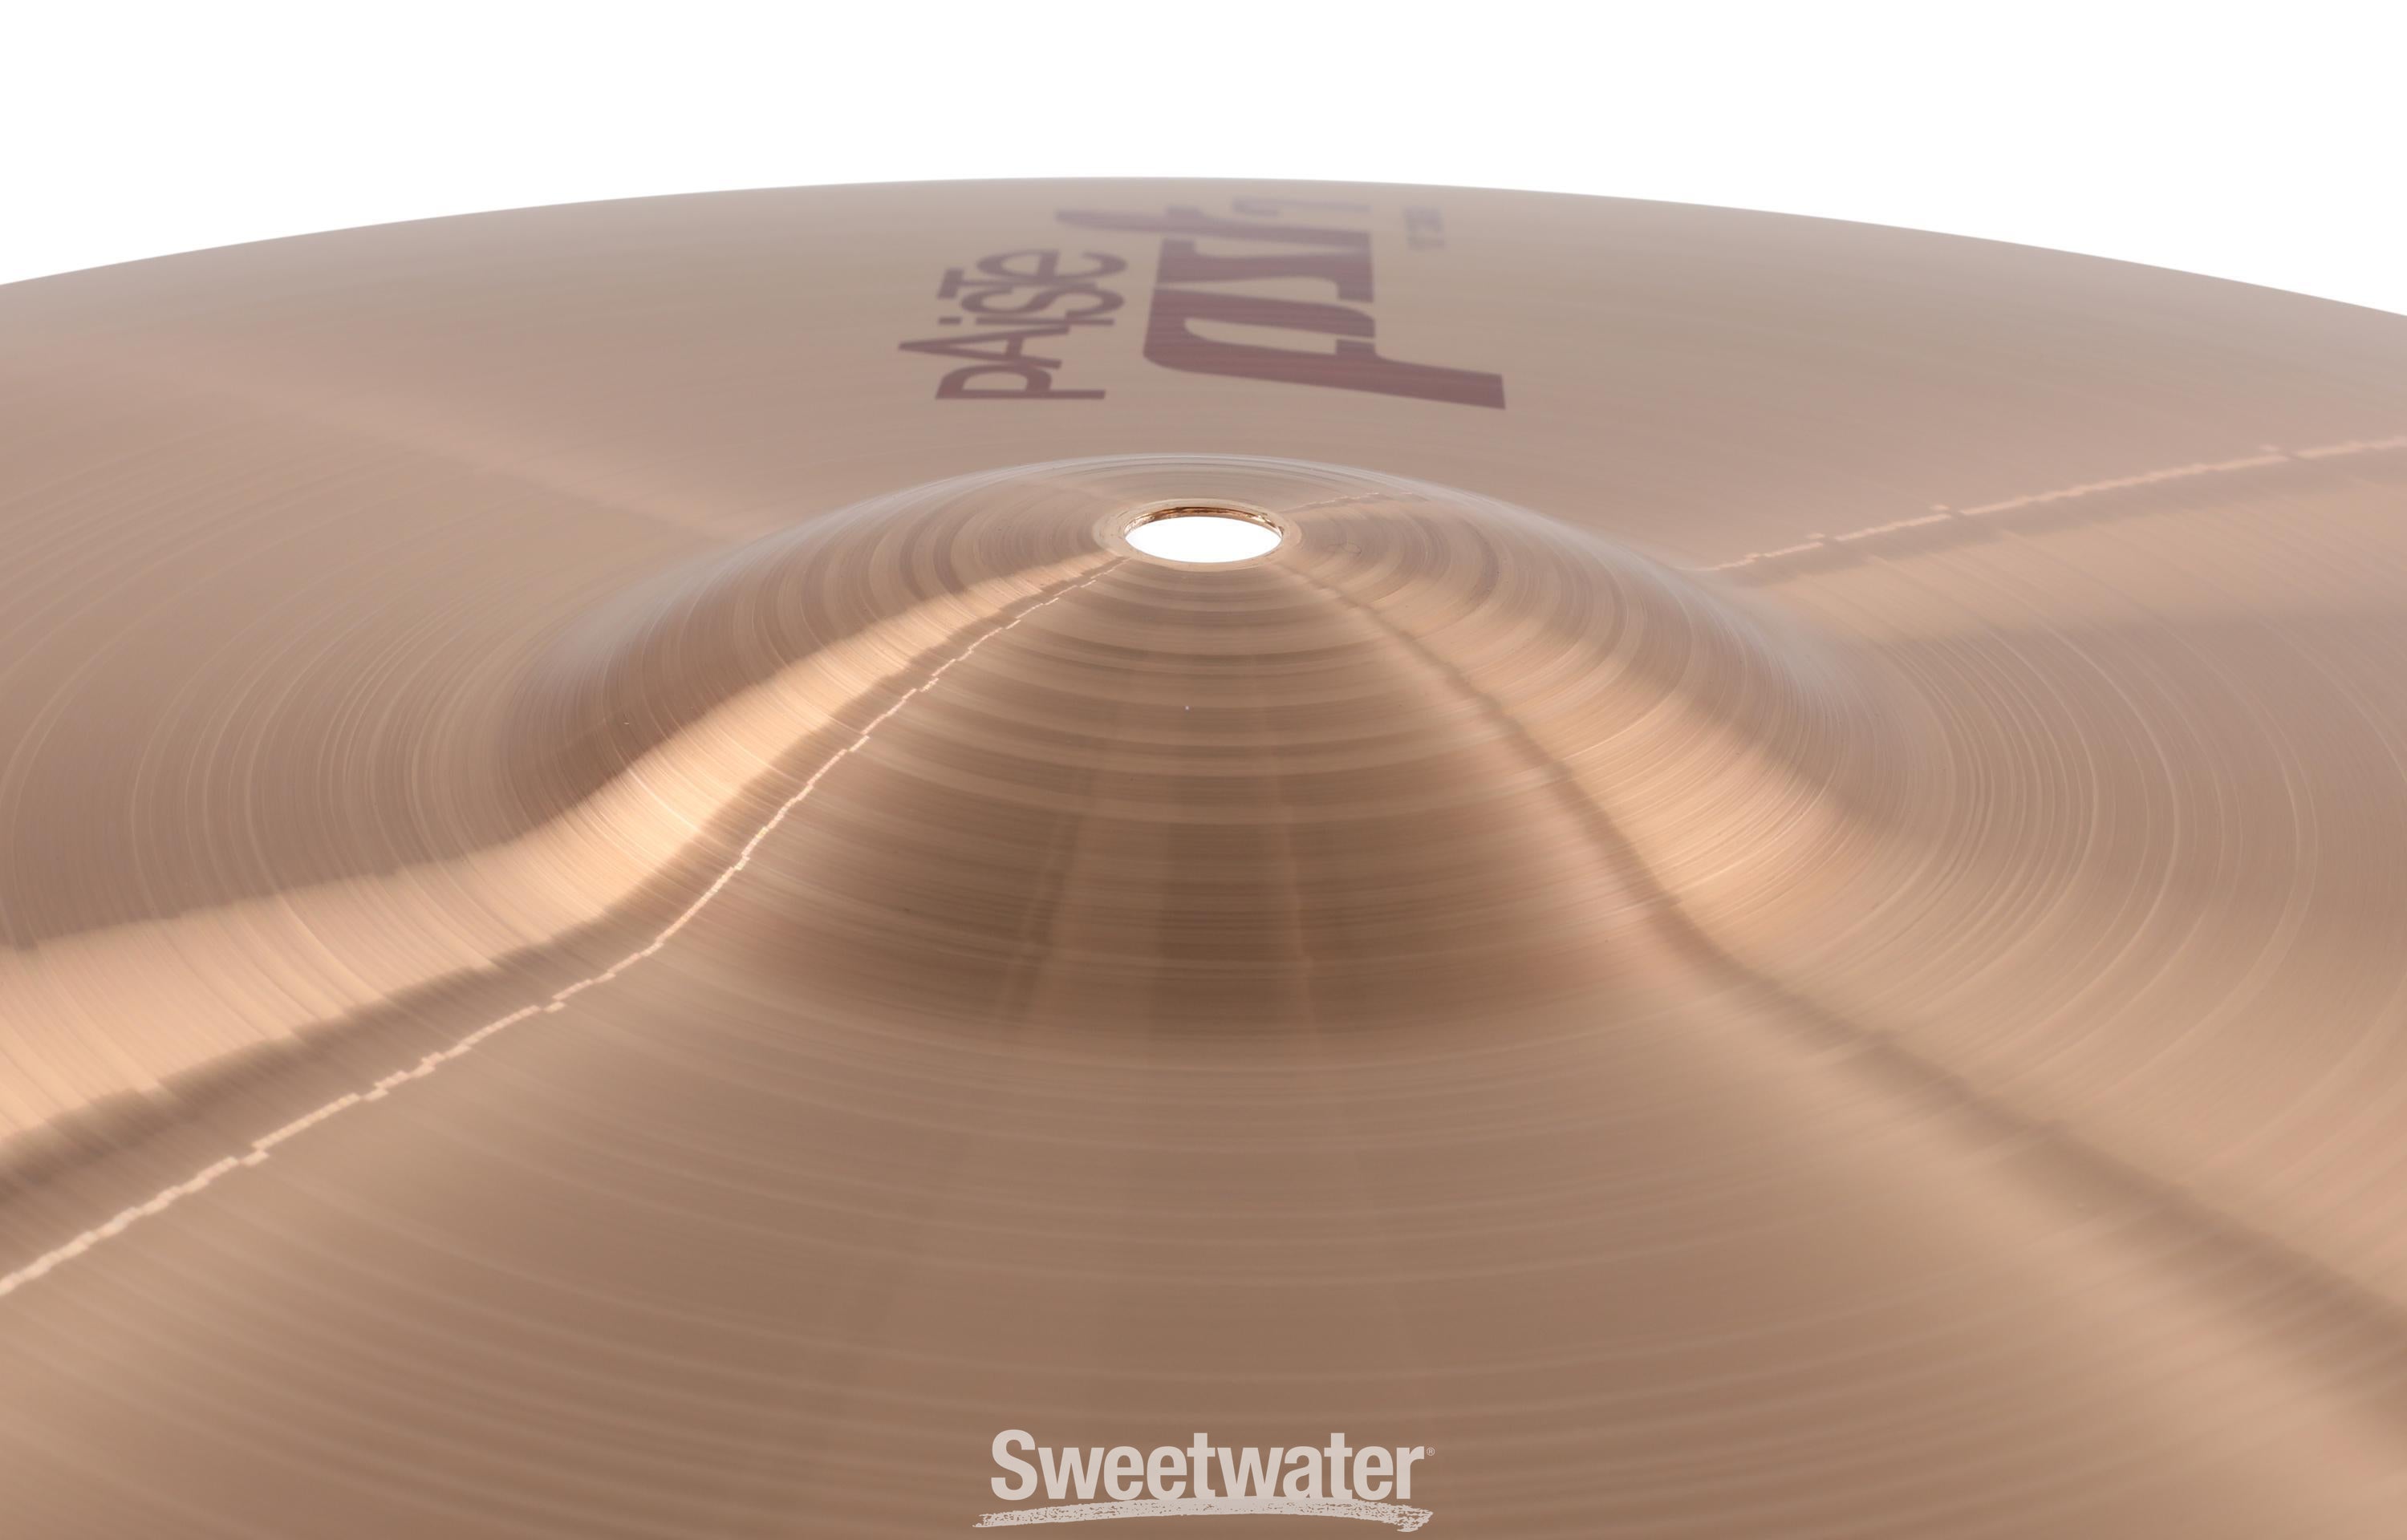 Paiste 18-inch PST 7 Crash Cymbal | Sweetwater